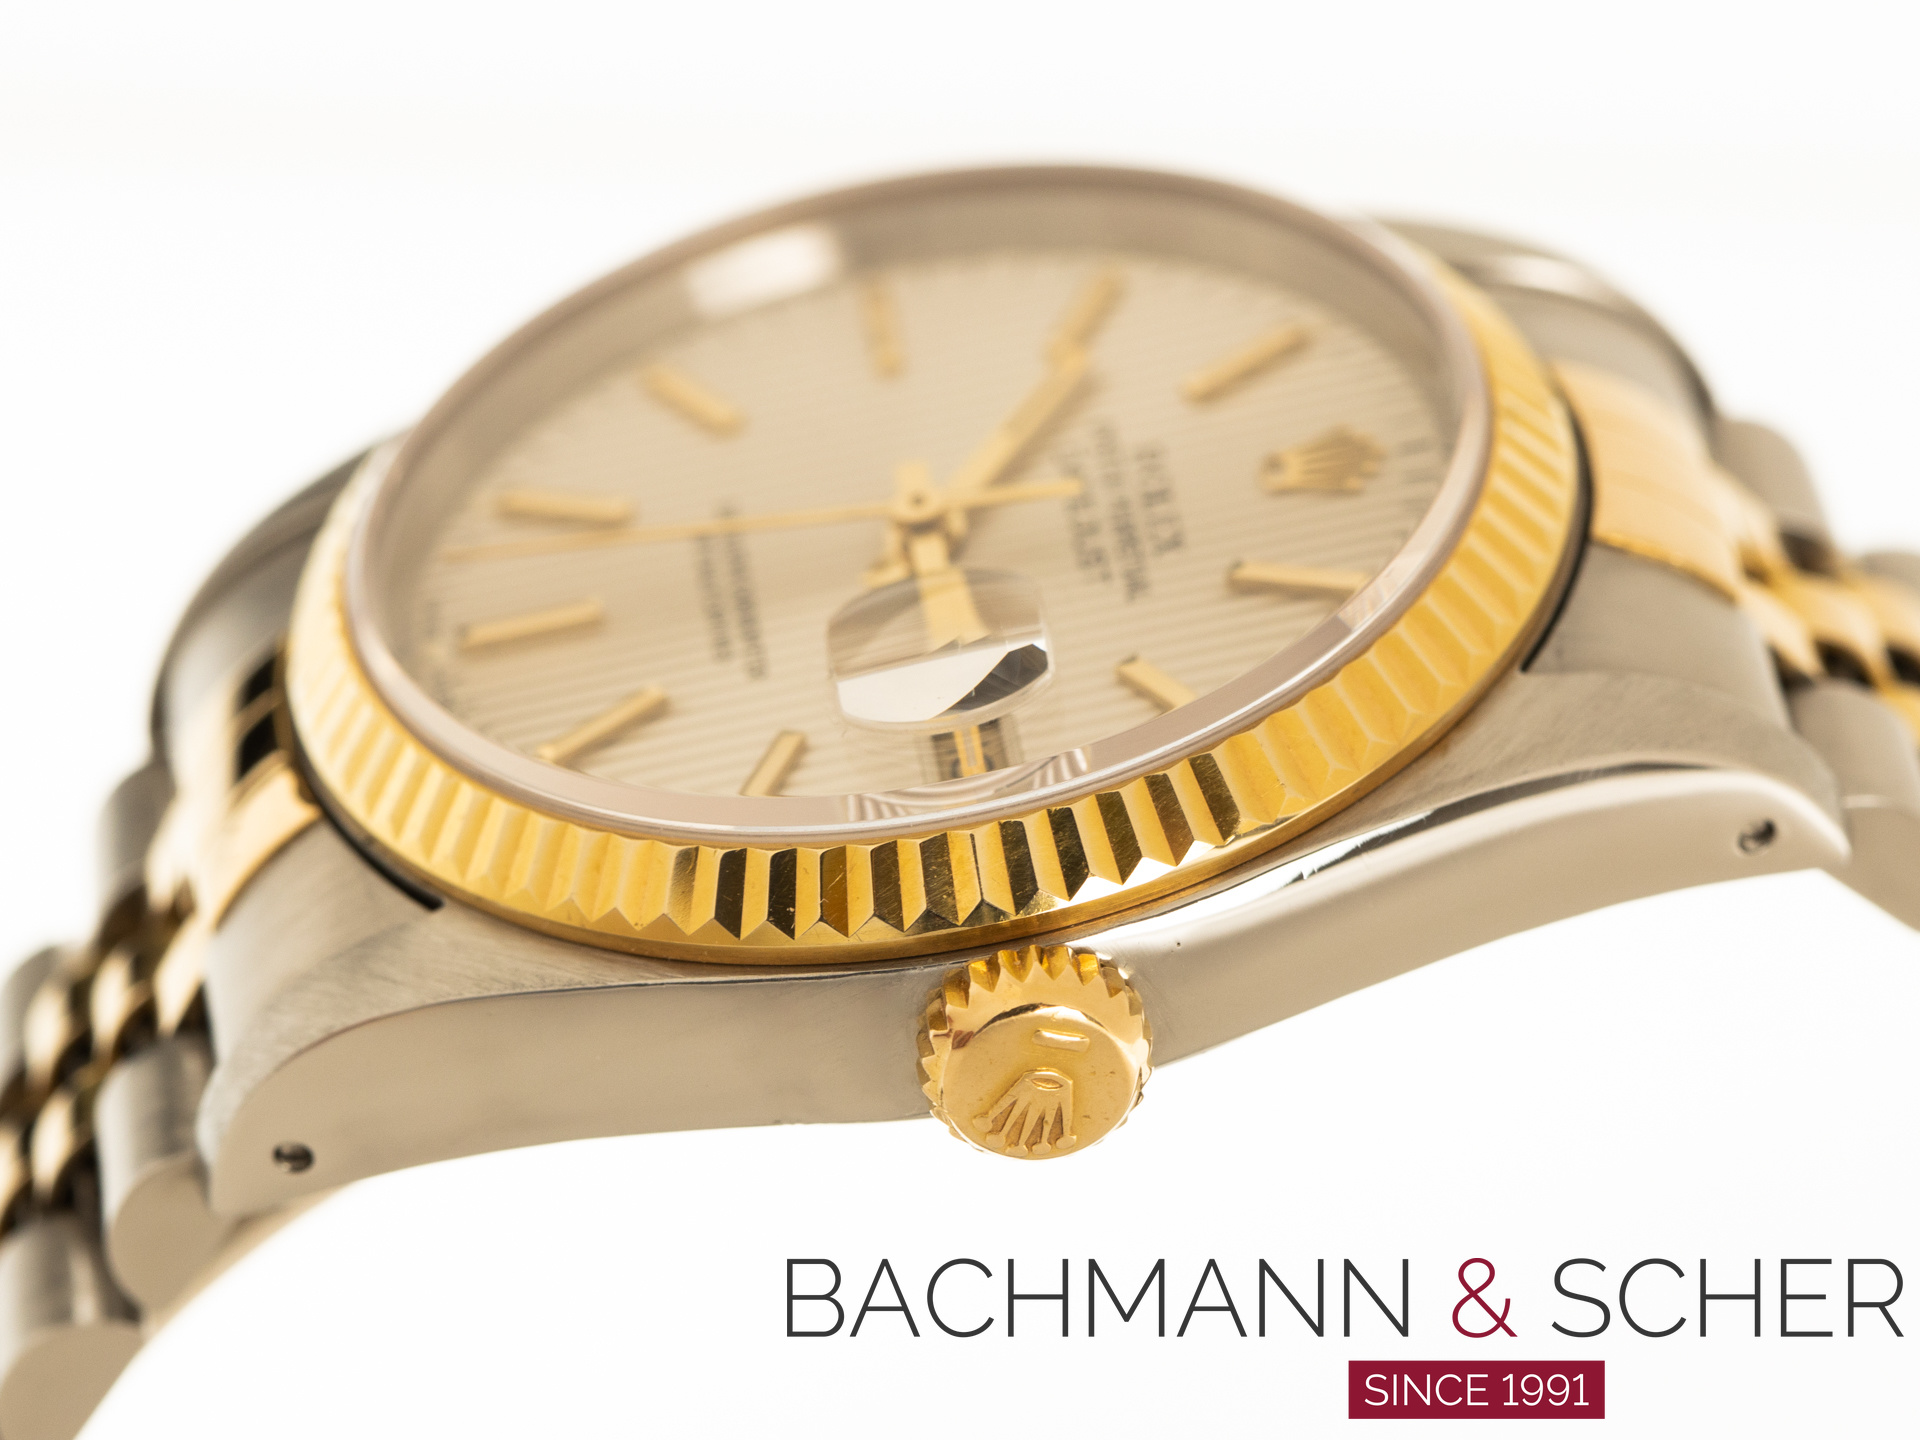 ROLEX, REF. 16233 STAINLESS STEEL AND 18K YELLOW GOLD 'OYSTER PERPETUAL  DATEJUST' WRISTWATCH, CIRCA 1990